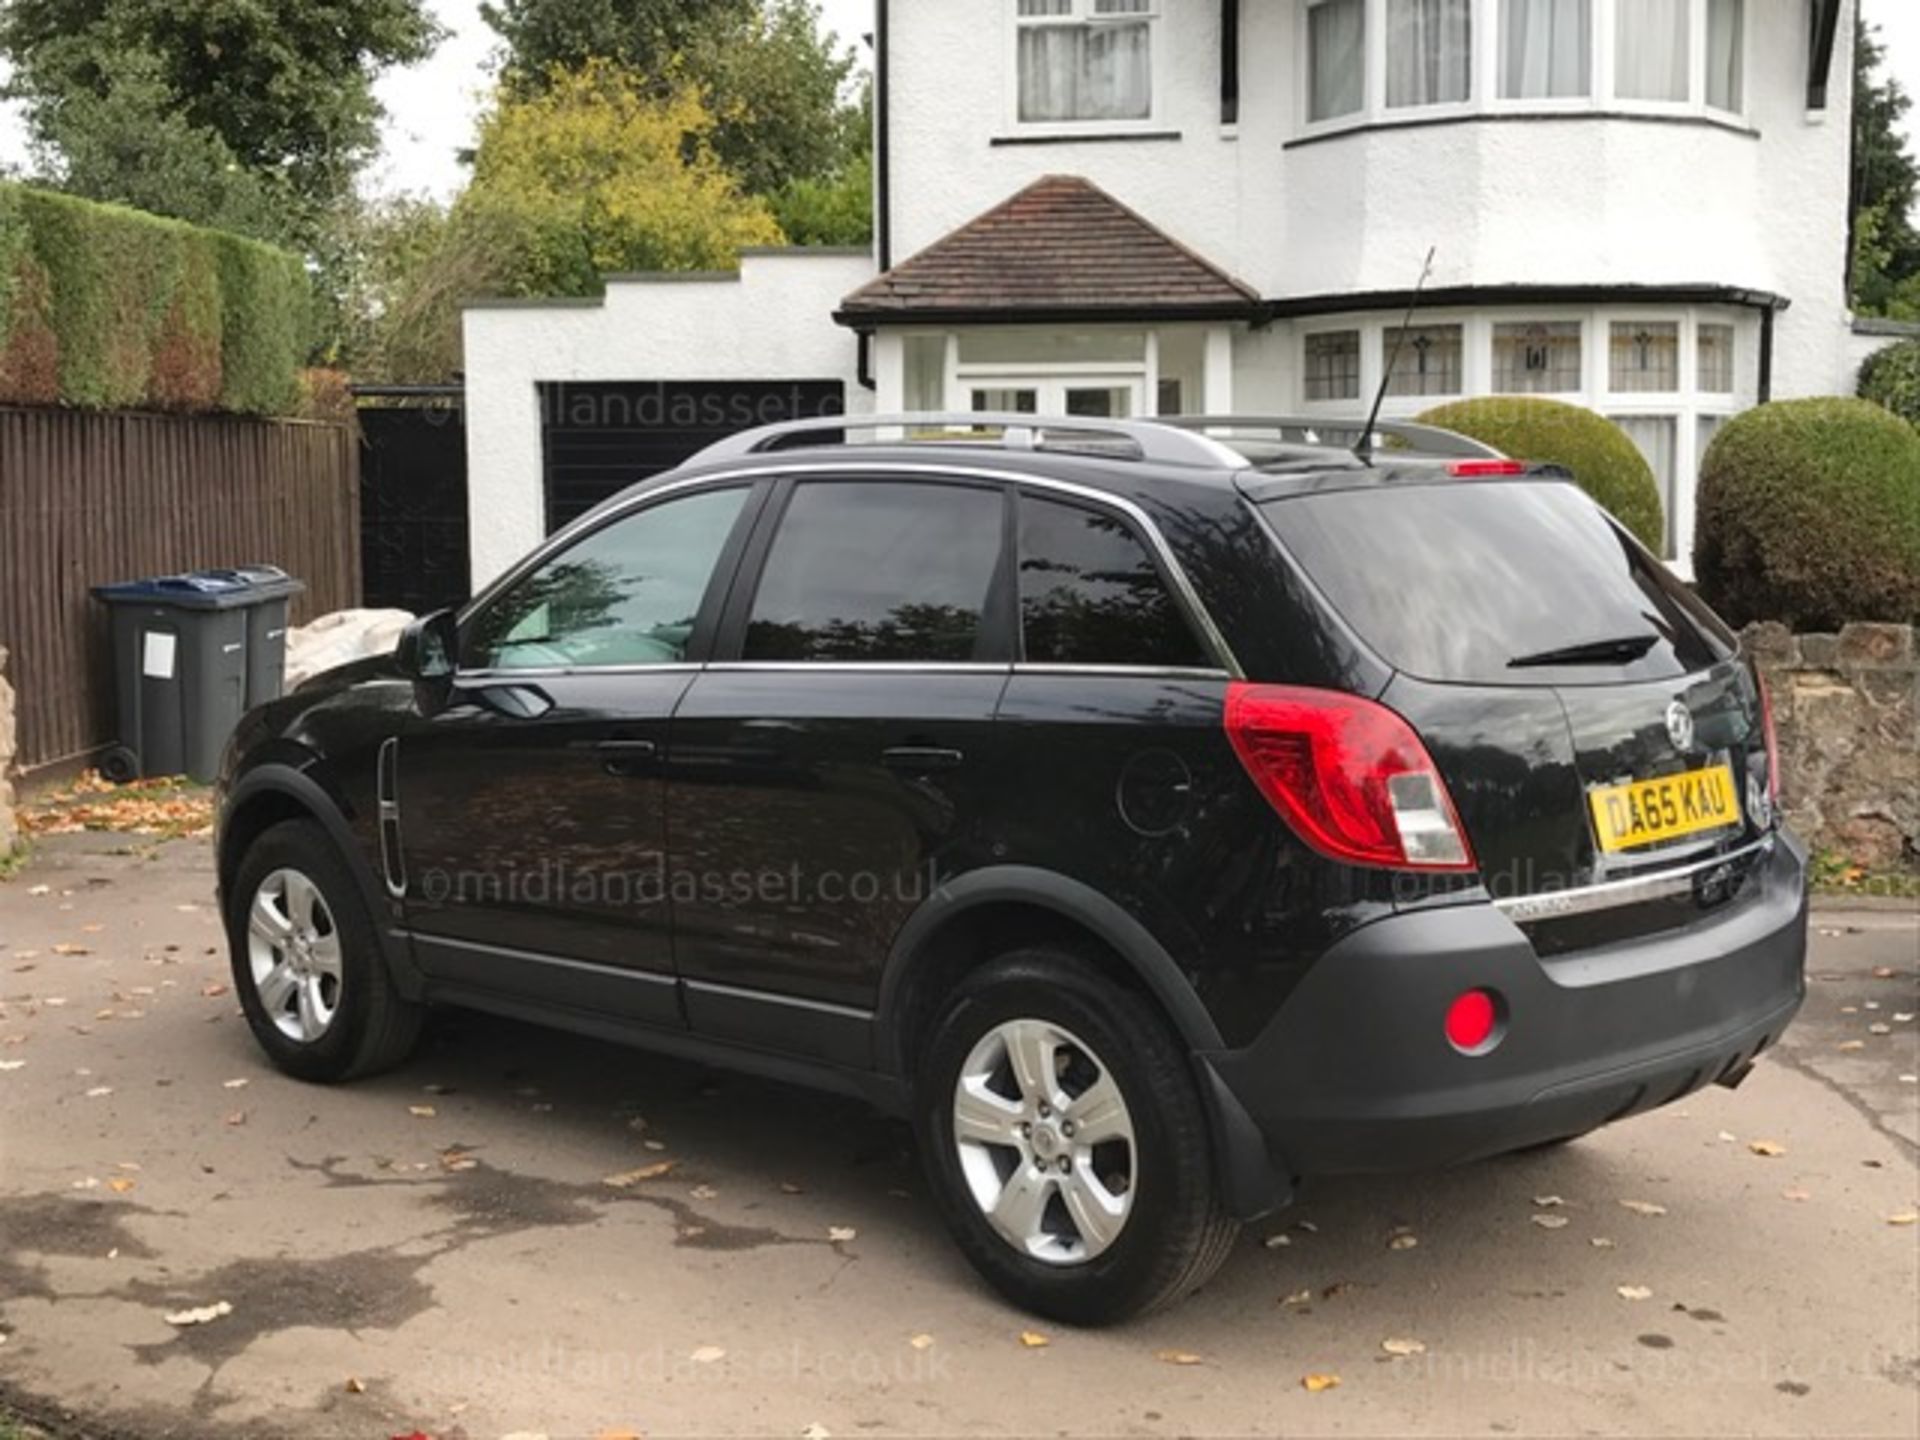 2015/15 REG VAUXHALL ANTARA EXCLUSIVE 2.2 CDTI ONE FORMER KEEPER FULL SERVICE HISTORY - Image 3 of 9